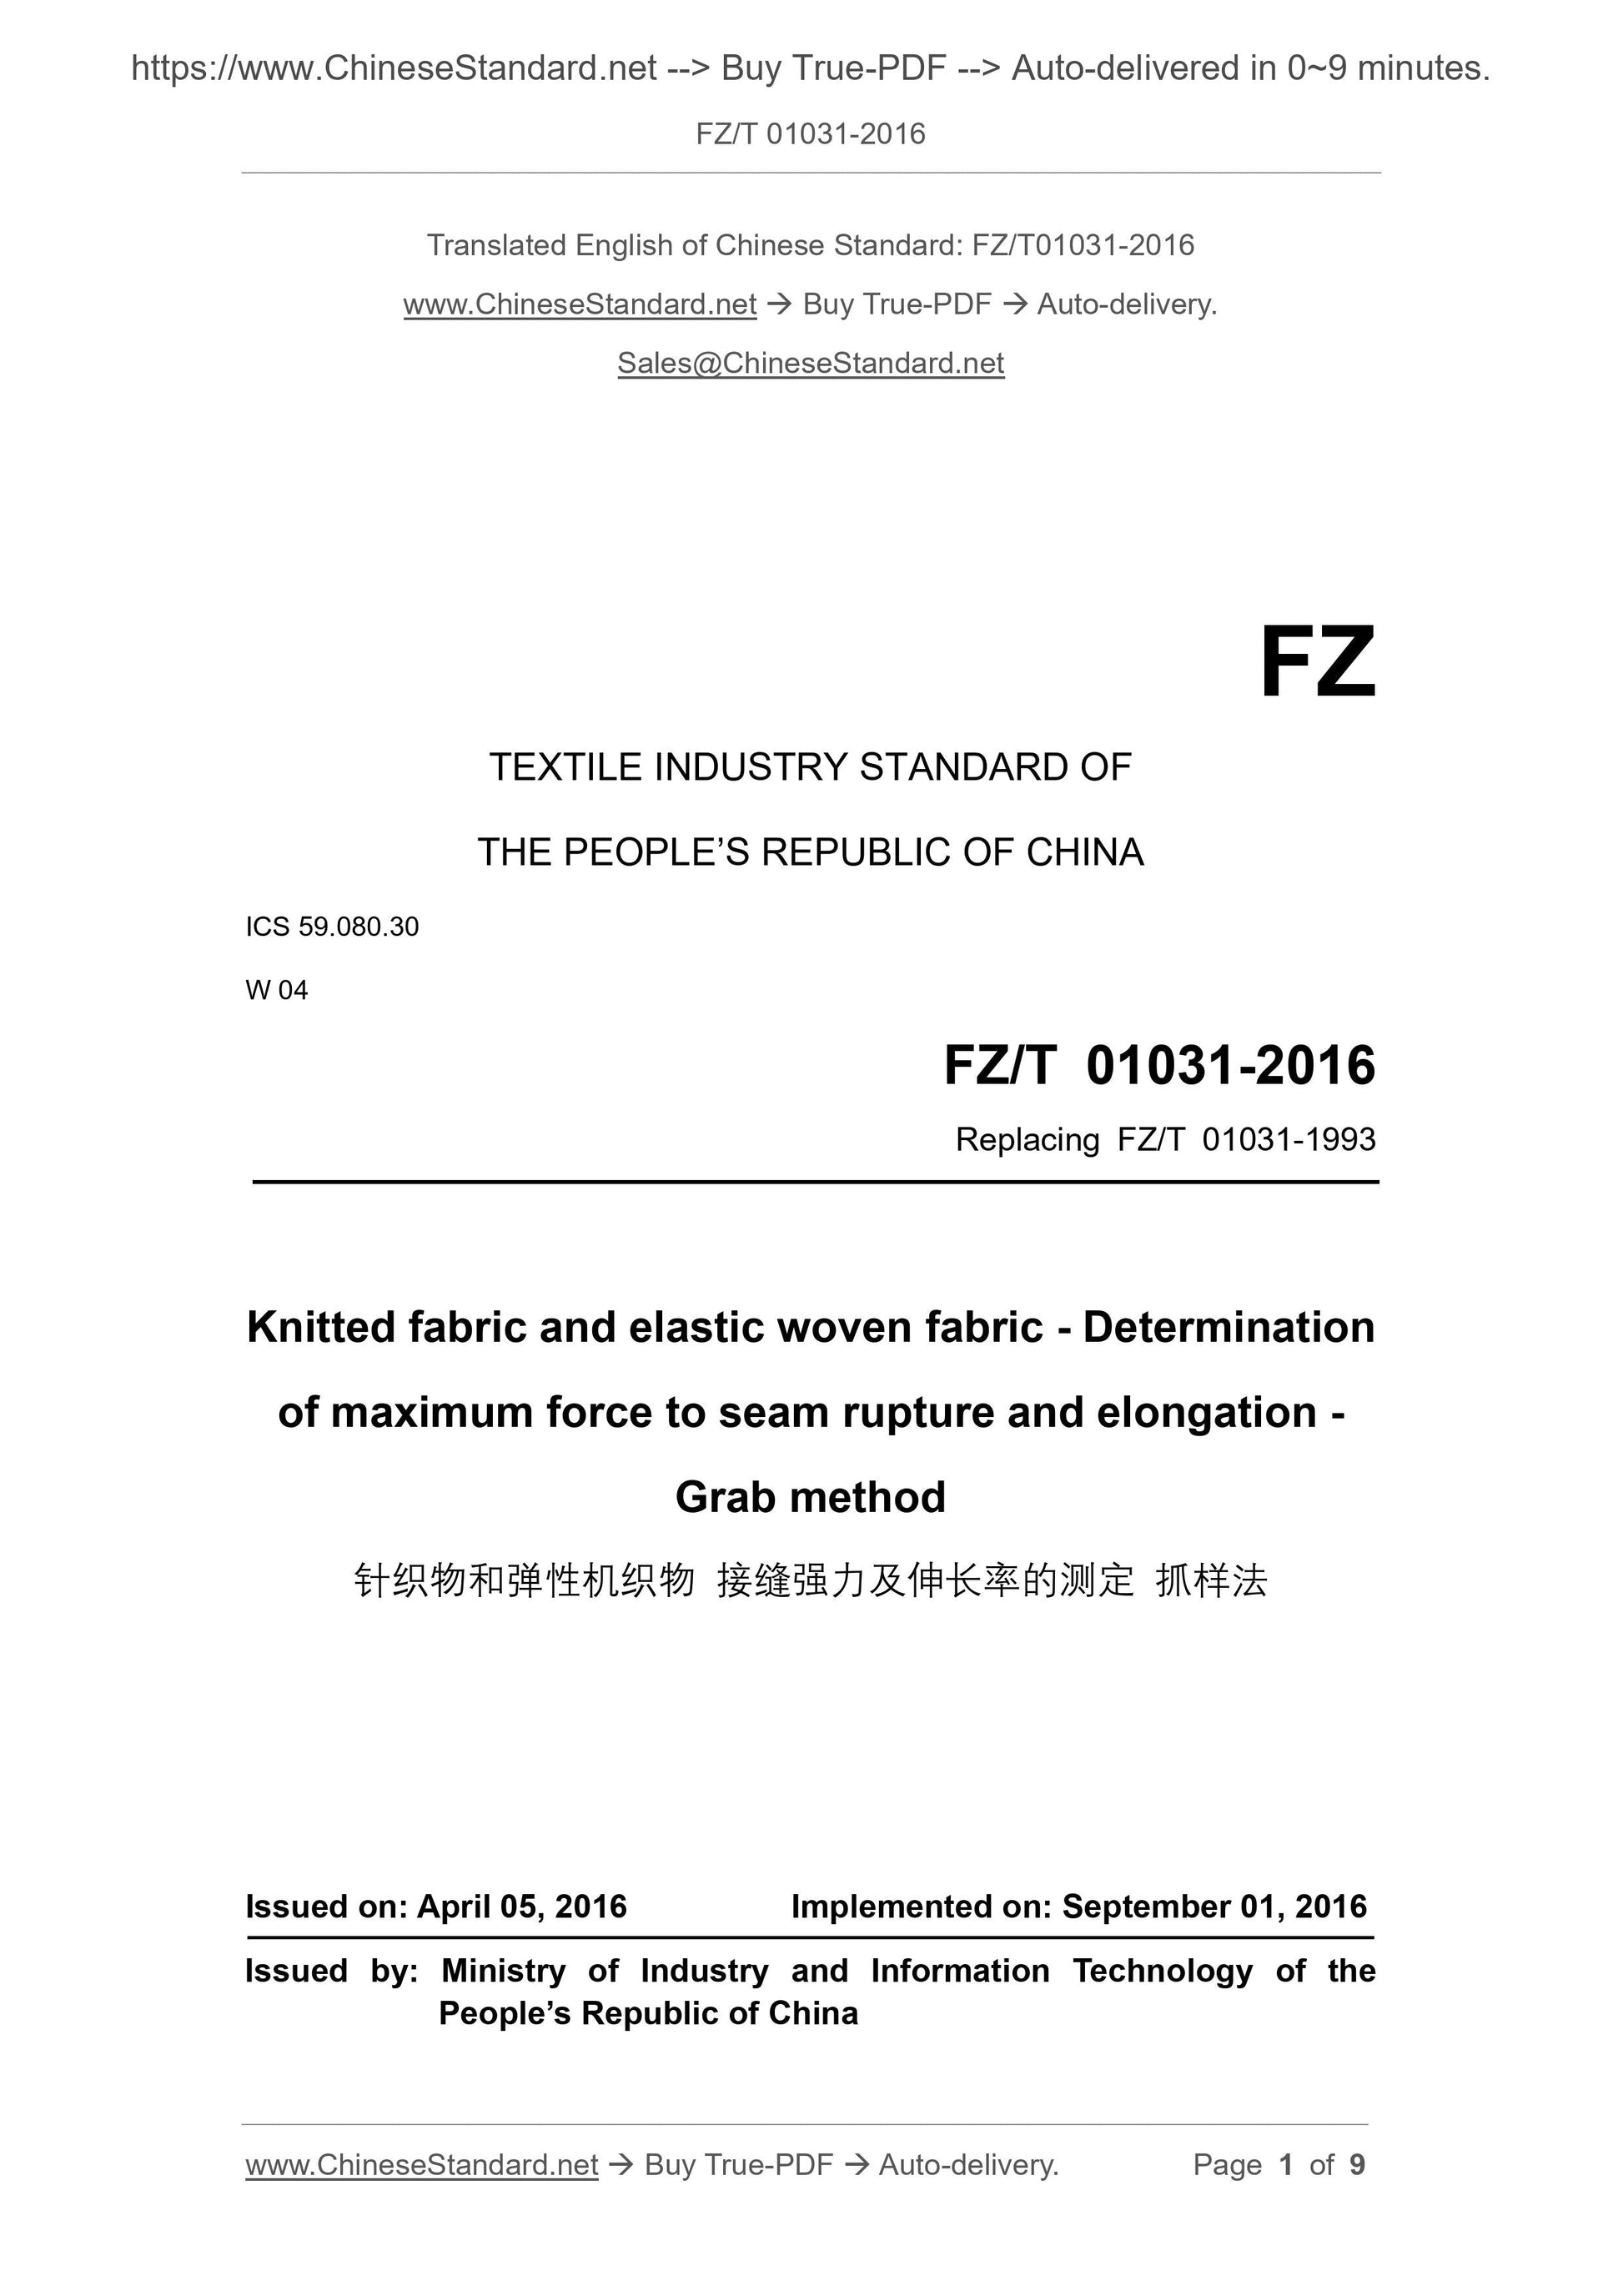 FZ/T 01031-2016 Page 1